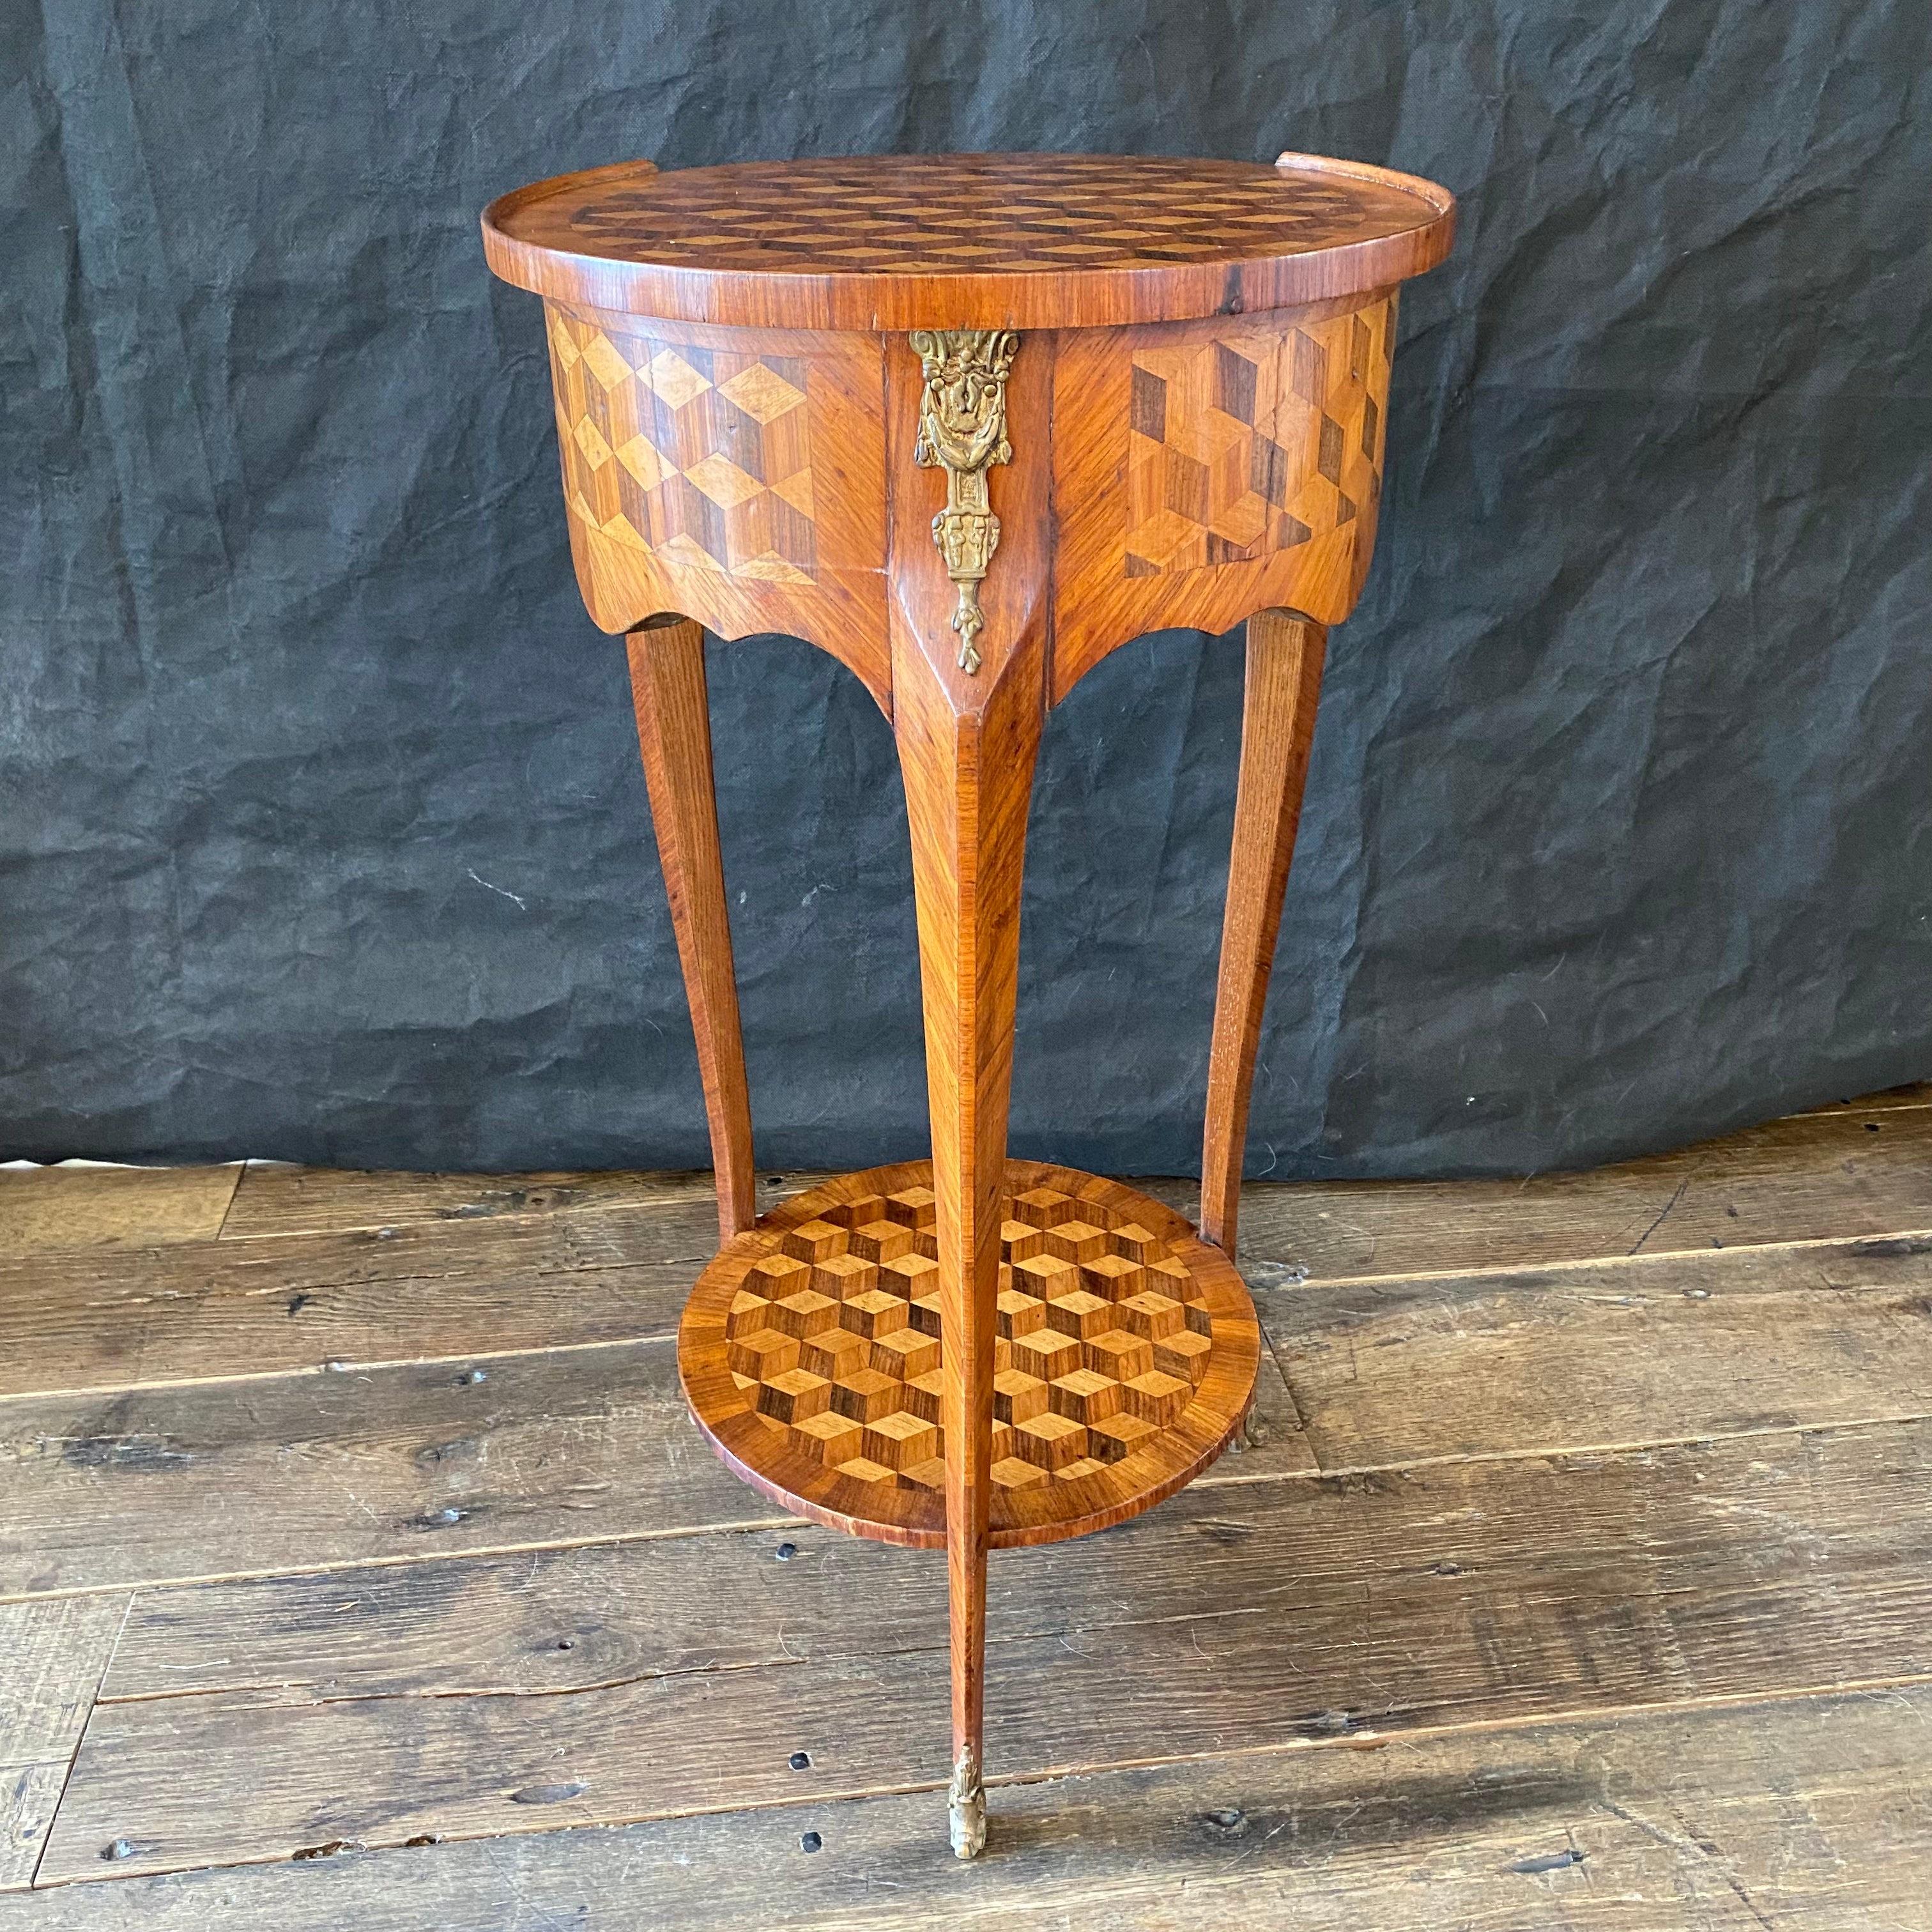 A gorgeous French Louis XVI bronze mounted parquetry side table. Each piece of this side table is beautifully hand-cut and fitted with a beautiful geometric diamond parquetry design of prismatic pieces of light and dark hardwood. The top sides of